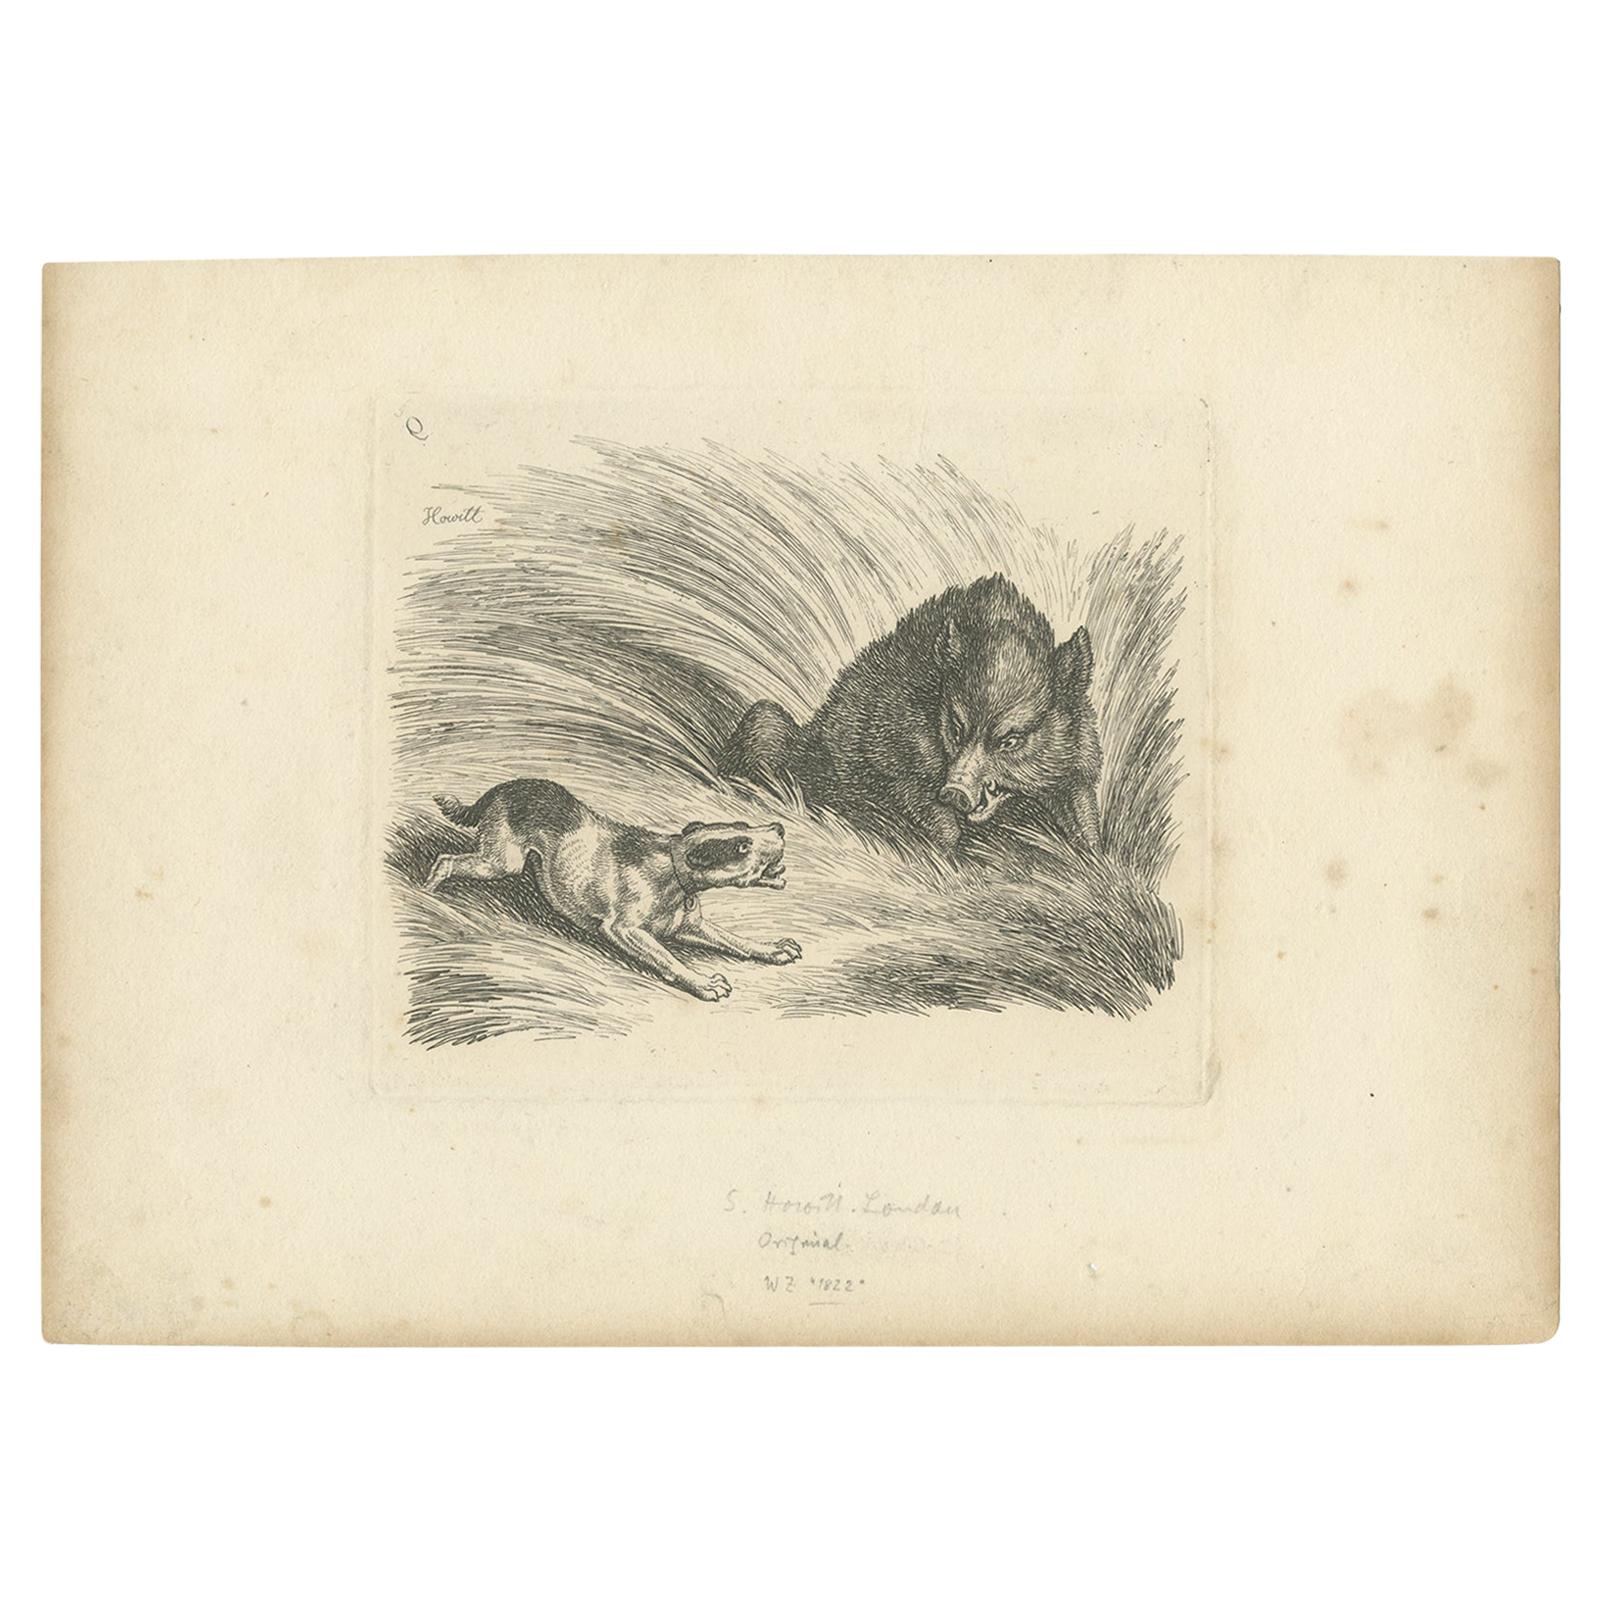 Antique Print of a Wild Boar and a Dog by Howitt, 'c.1820'